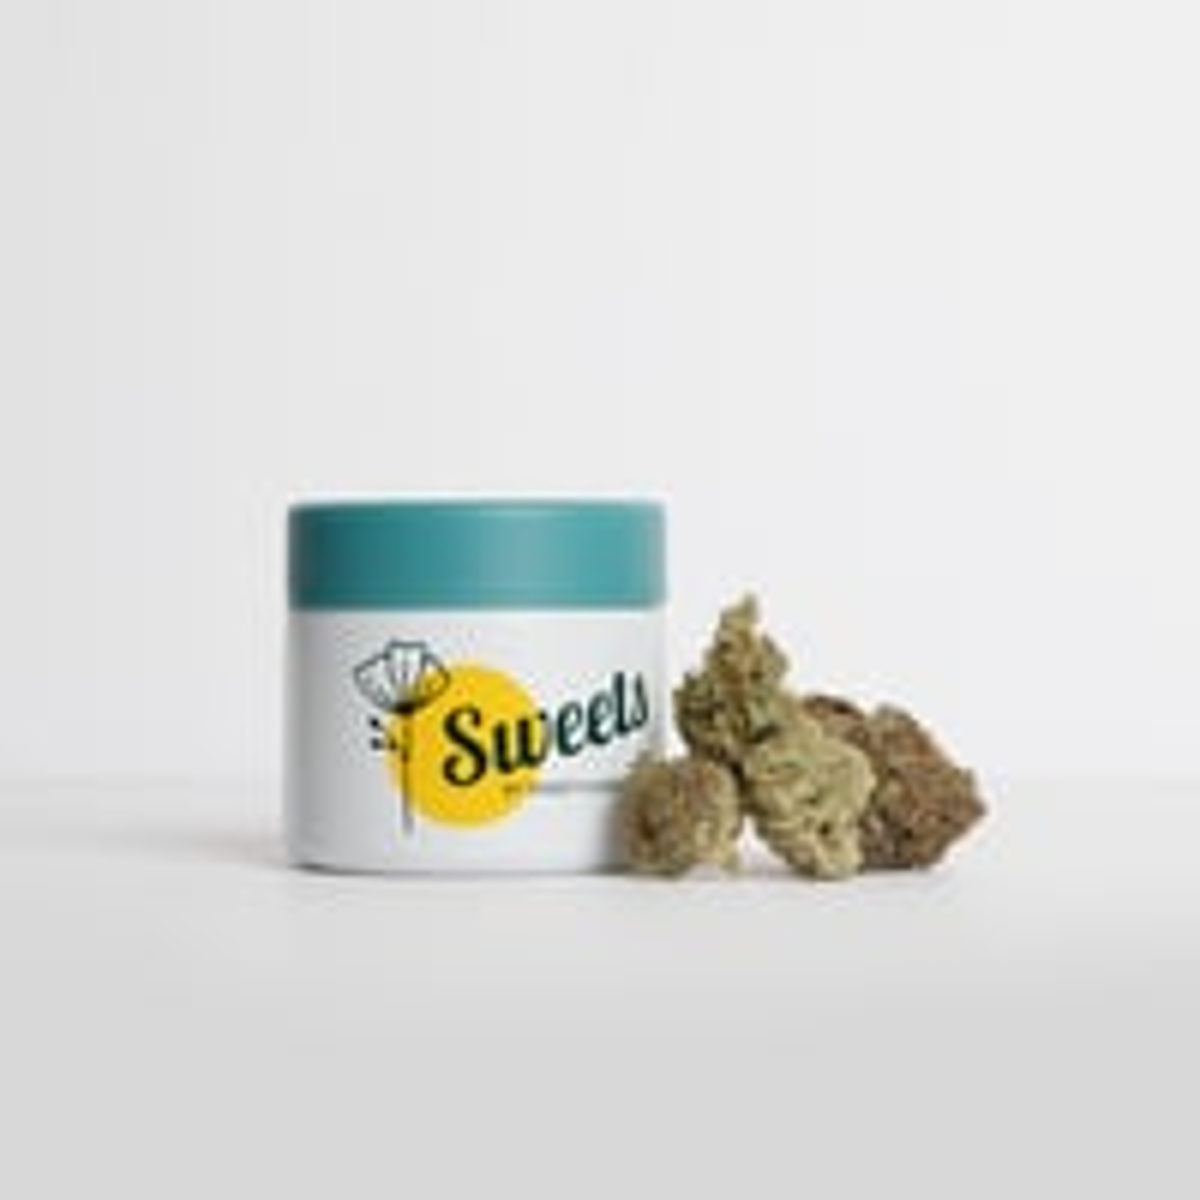 Sweet Flower Launches Pasadena Store; Solidifying Its Position As Southern California's Leading Cannabis Retail Chain